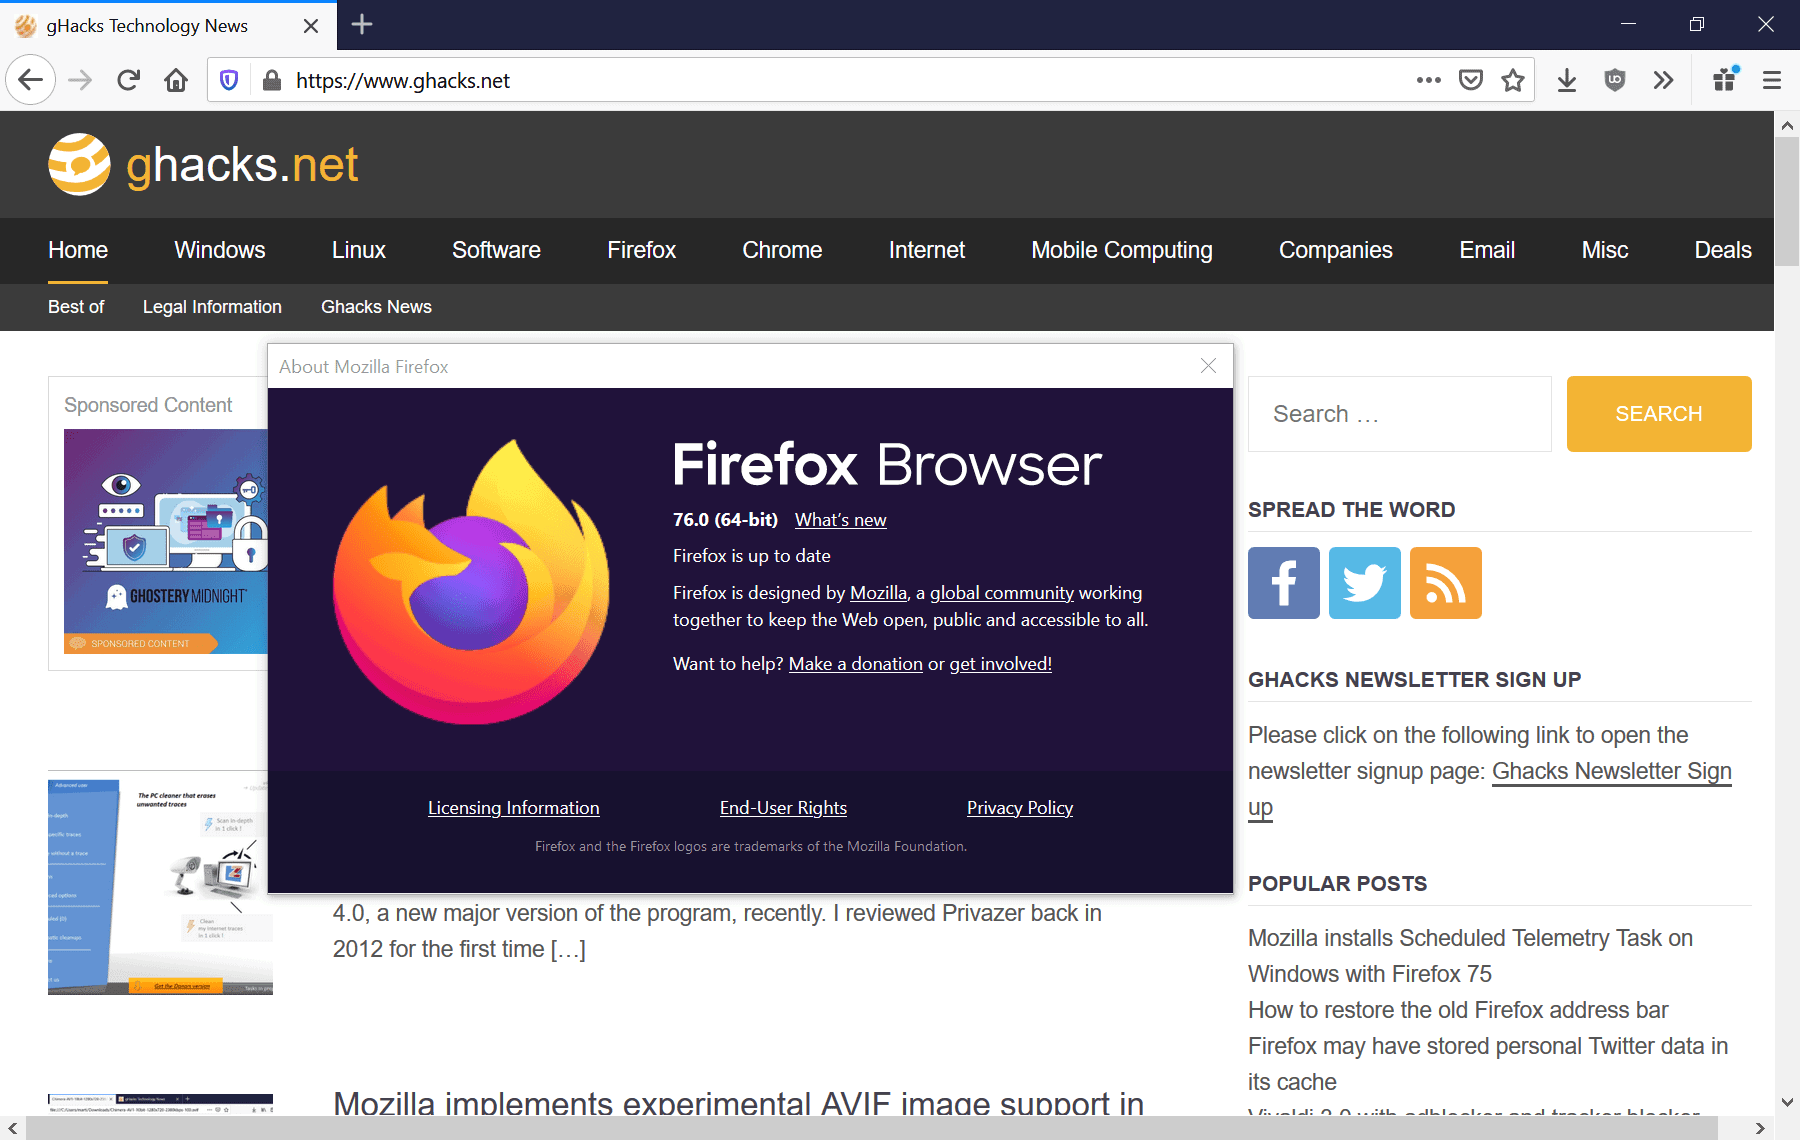 Here is what is new and changed in Firefox 76.0